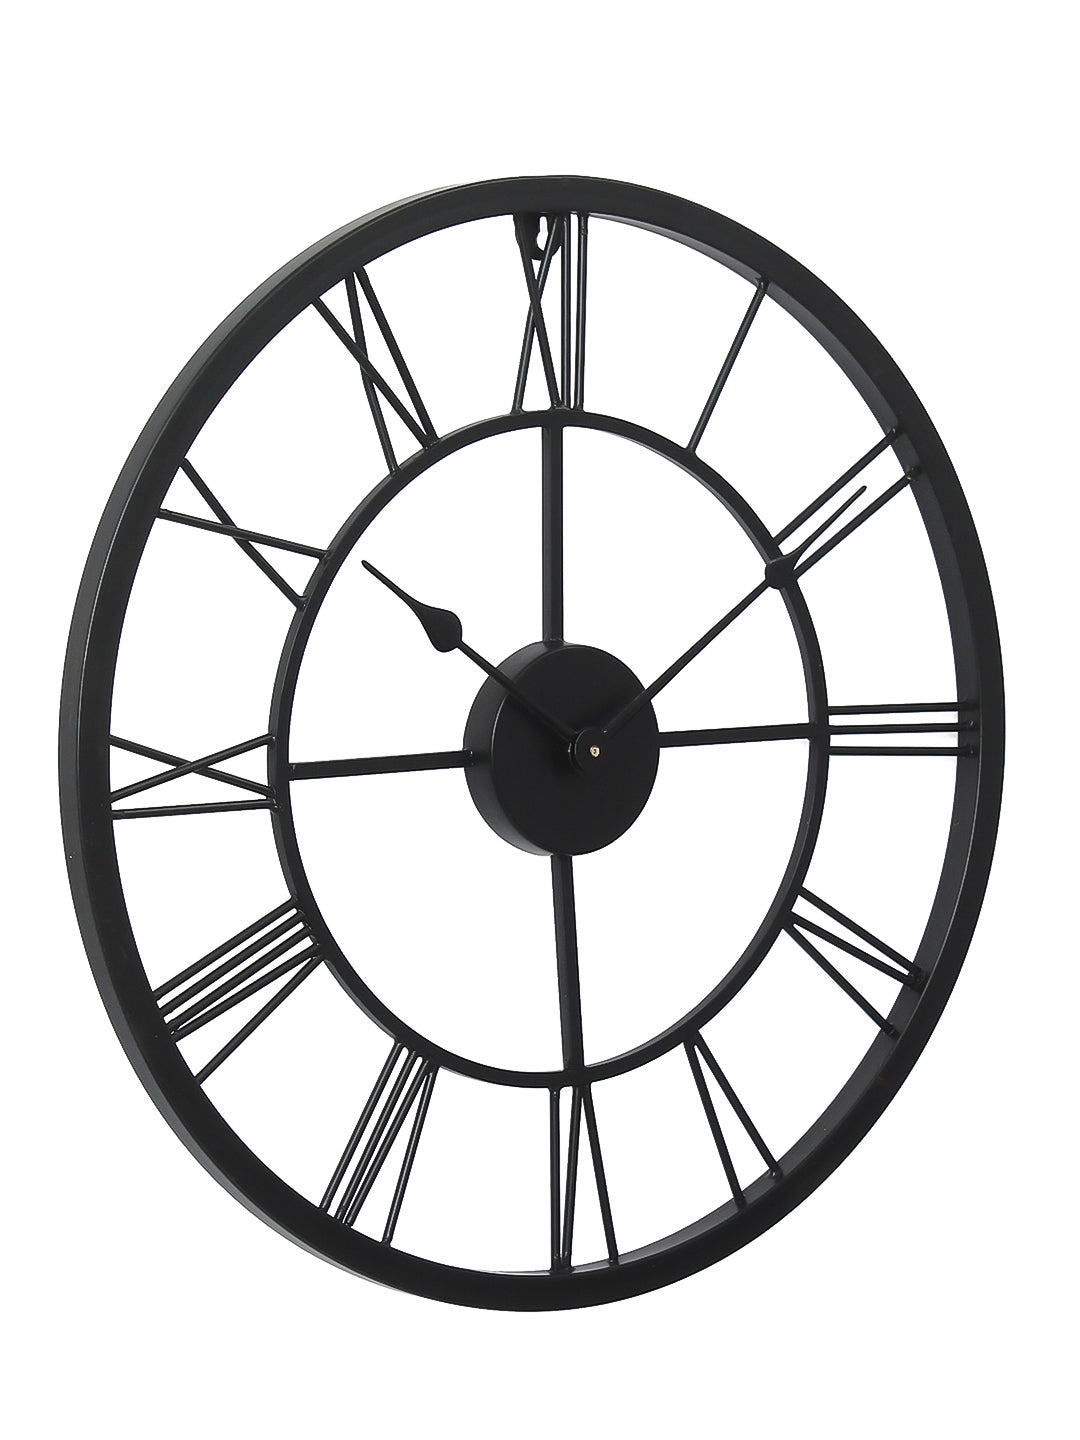 Black Iron Round Handcrafted Analog Roman Numeral Wall Clock Without Glass 5